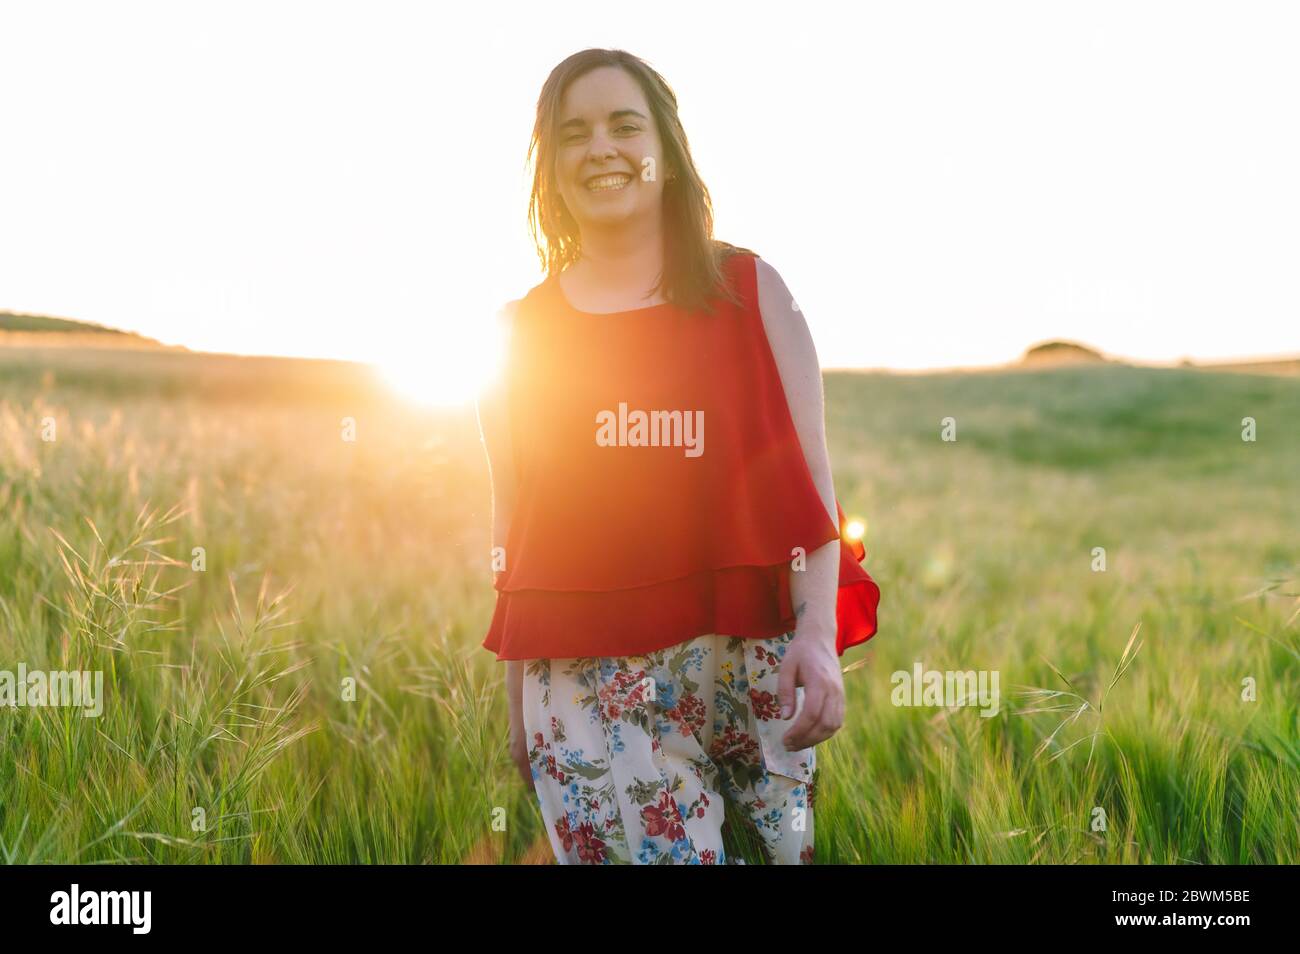 Cute girl in red dress, laughing with joy outdoors in the springtime sunset .  Stock Photo